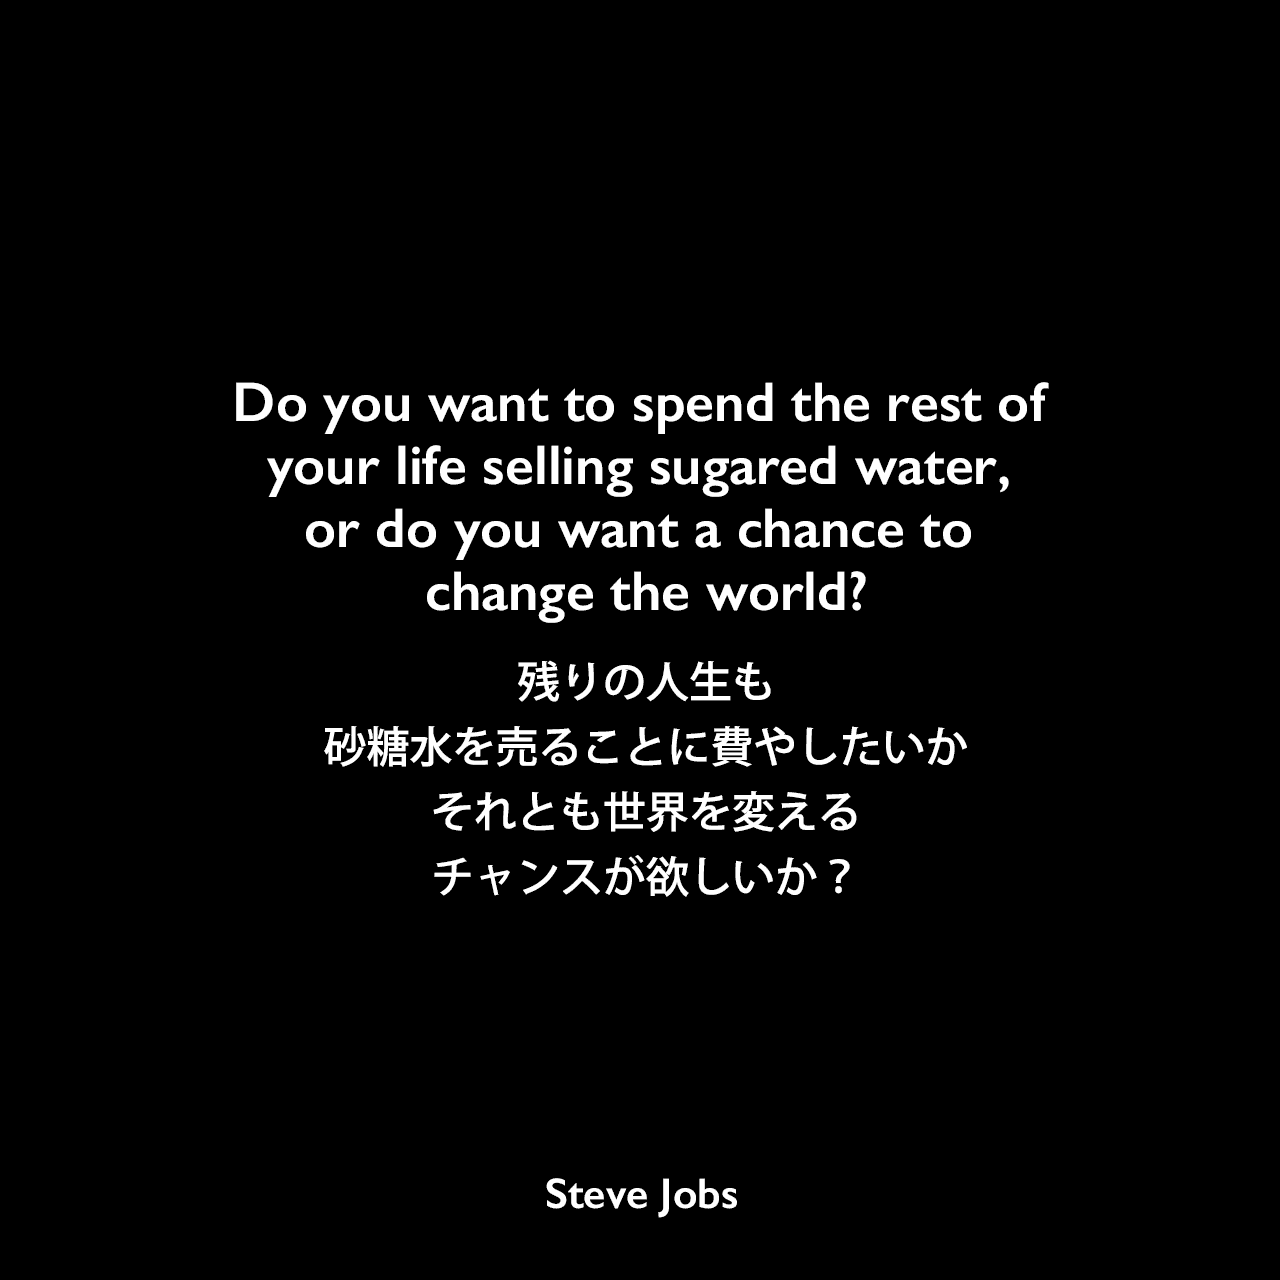 Do you want to spend the rest of your life selling sugared water, or do you want a chance to change the world?残りの人生も砂糖水を売ることに費やしたいか、それとも世界を変えるチャンスが欲しいか？- ジョン・スカリーをアップルのCEOに説得する際に言った言葉Steve Jobs